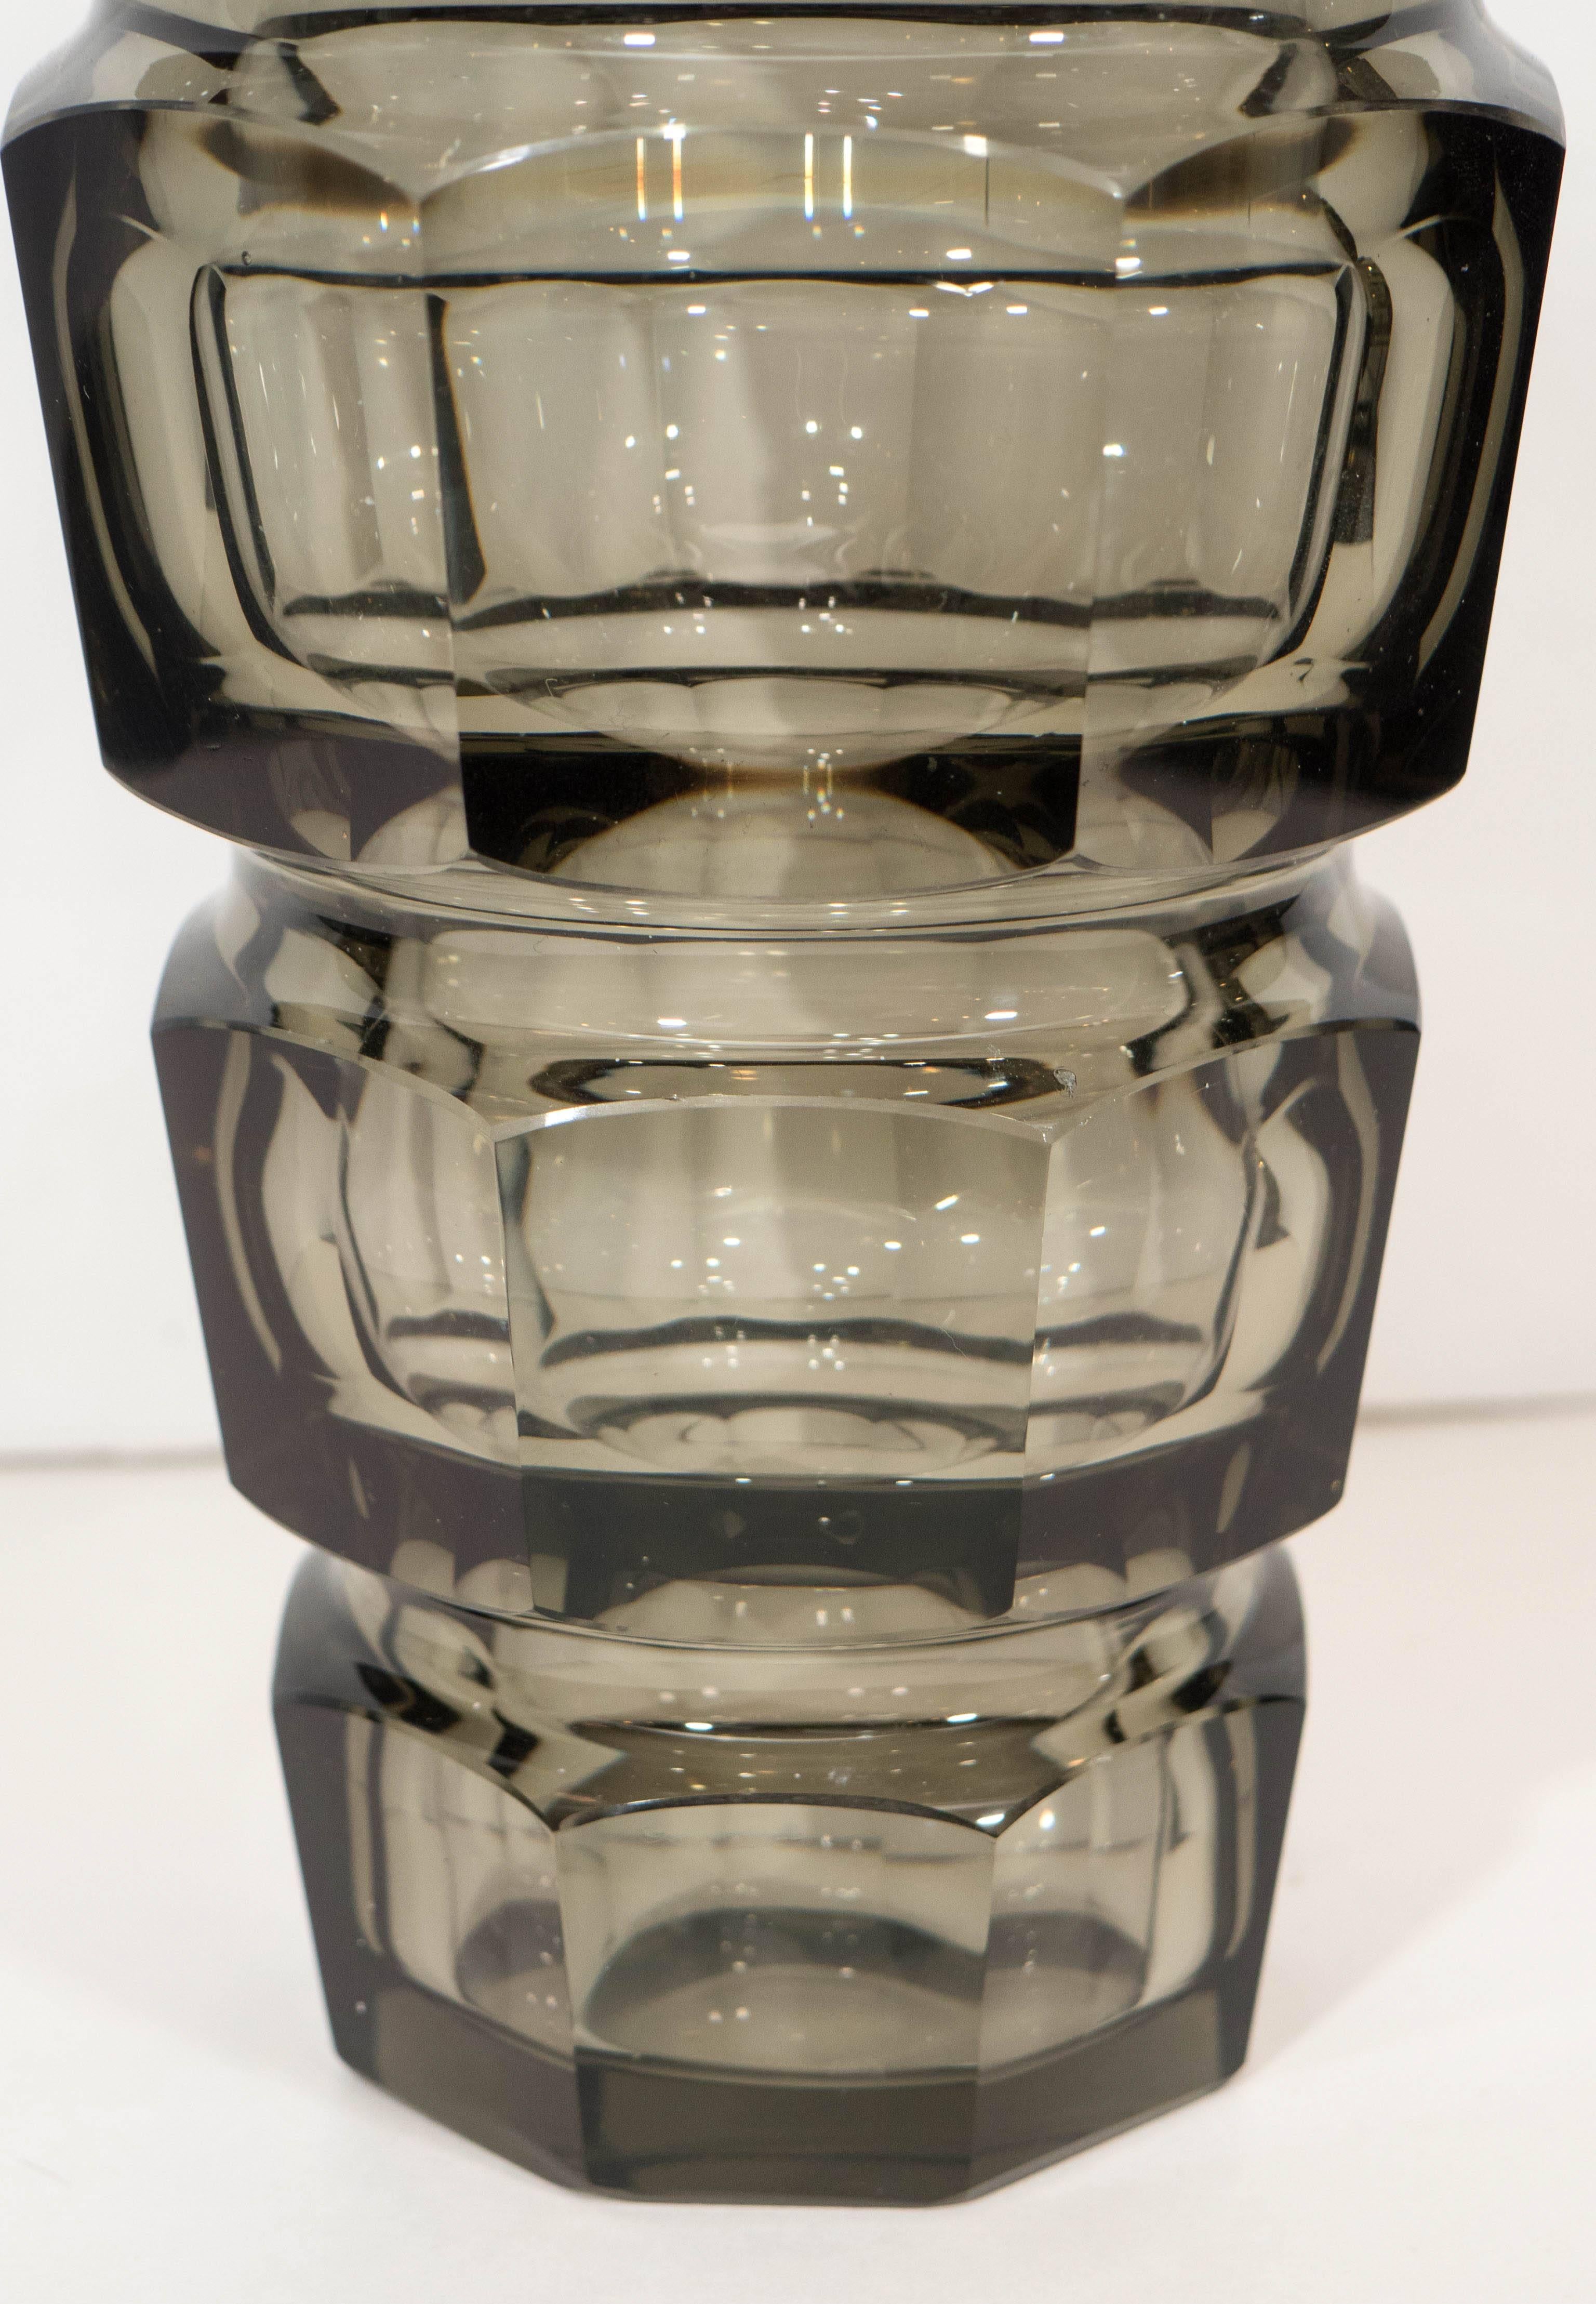 A very large, crystal vase in gray, designed by Josef Hoffmann for Moser Glassworks, circa 1935 to 1940. This vase is in very good condition, consistent with age and use.

Item# 15-11-02.